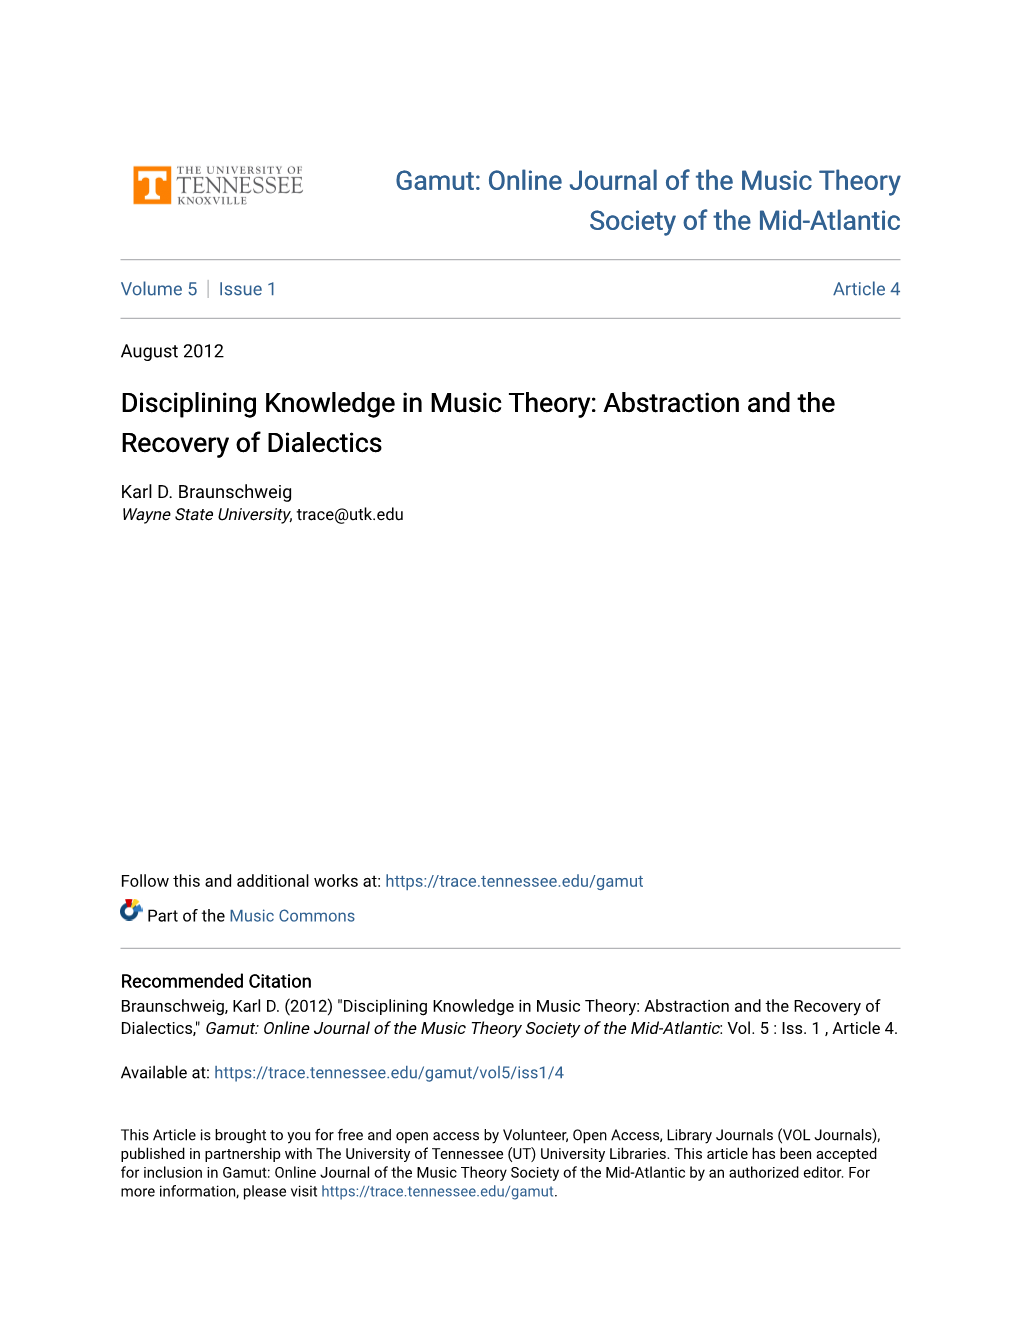 Disciplining Knowledge in Music Theory: Abstraction and the Recovery of Dialectics